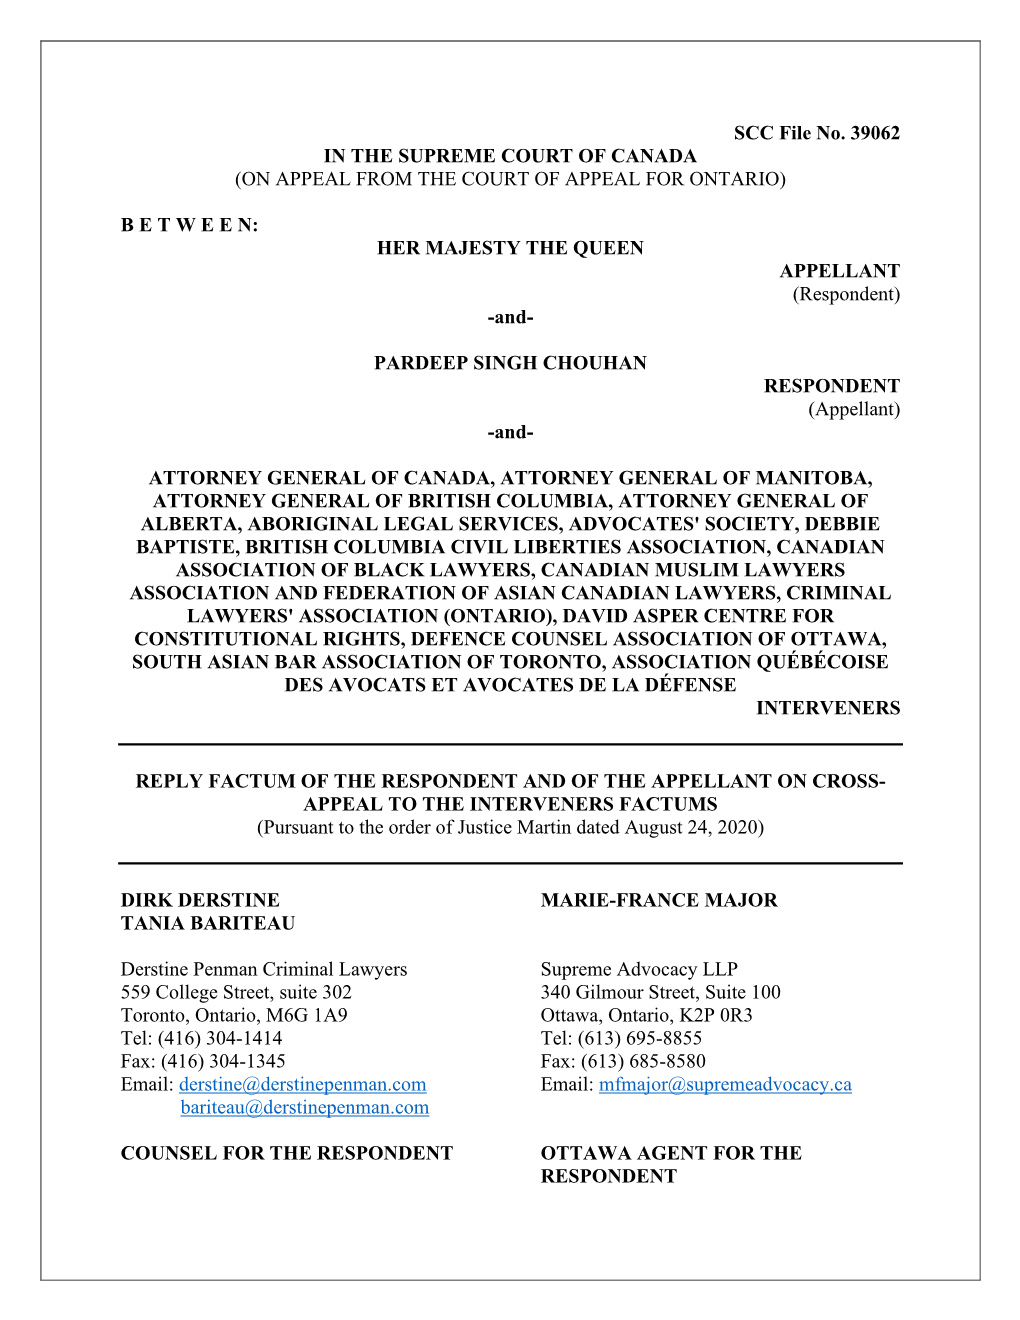 SCC File No. 39062 in the SUPREME COURT of CANADA (ON APPEAL from the COURT of APPEAL for ONTARIO)